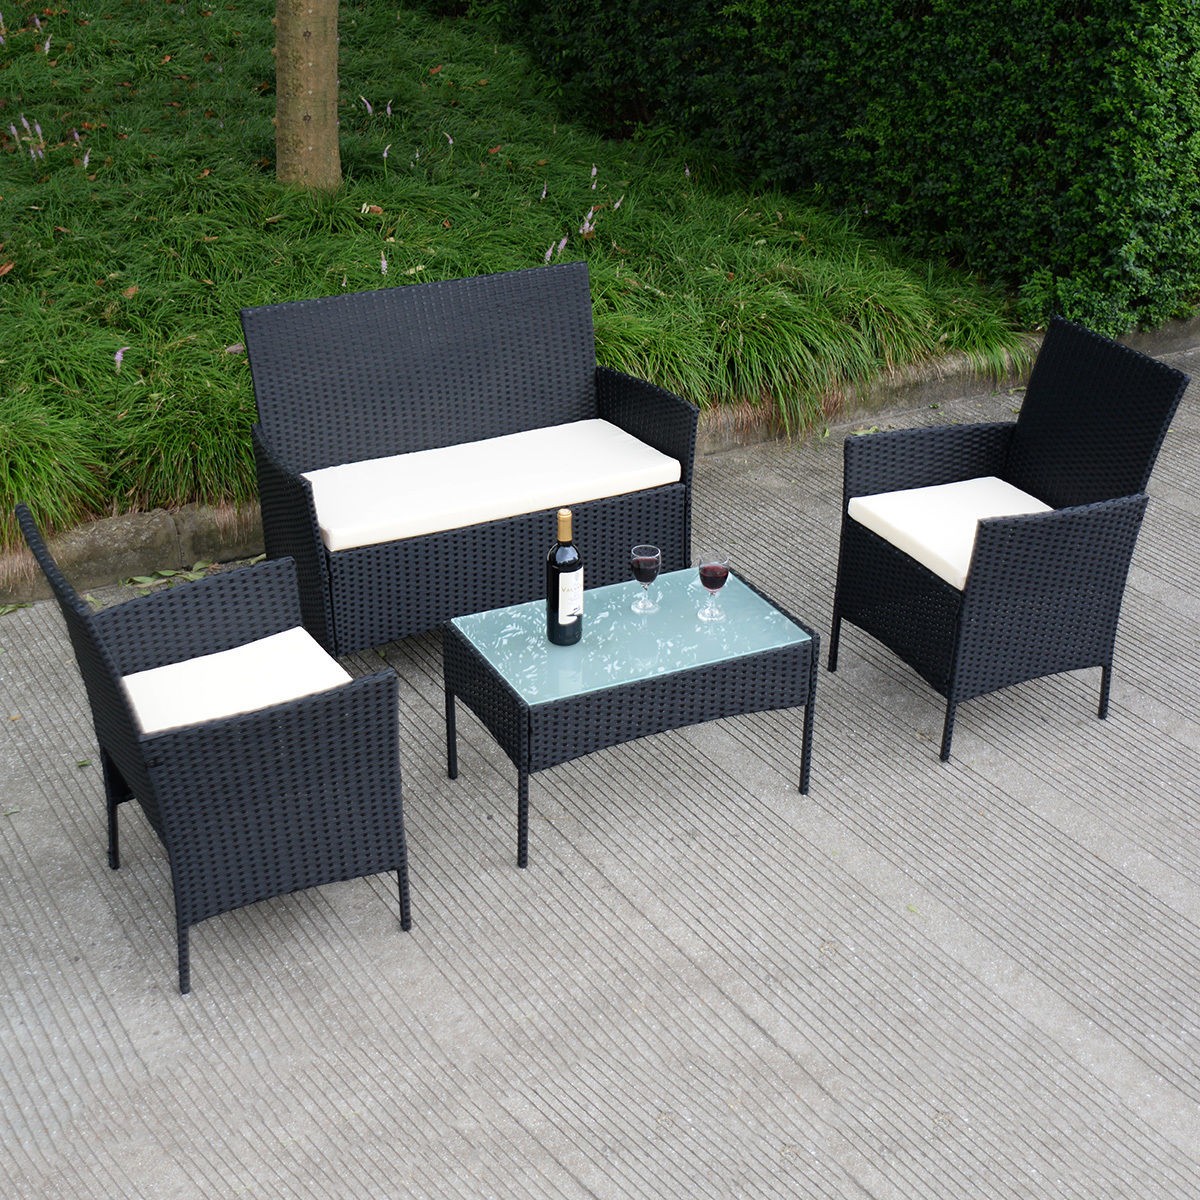 4 Pcs Outdoor Rattan Wicker Cushioned Seat with A Loveset